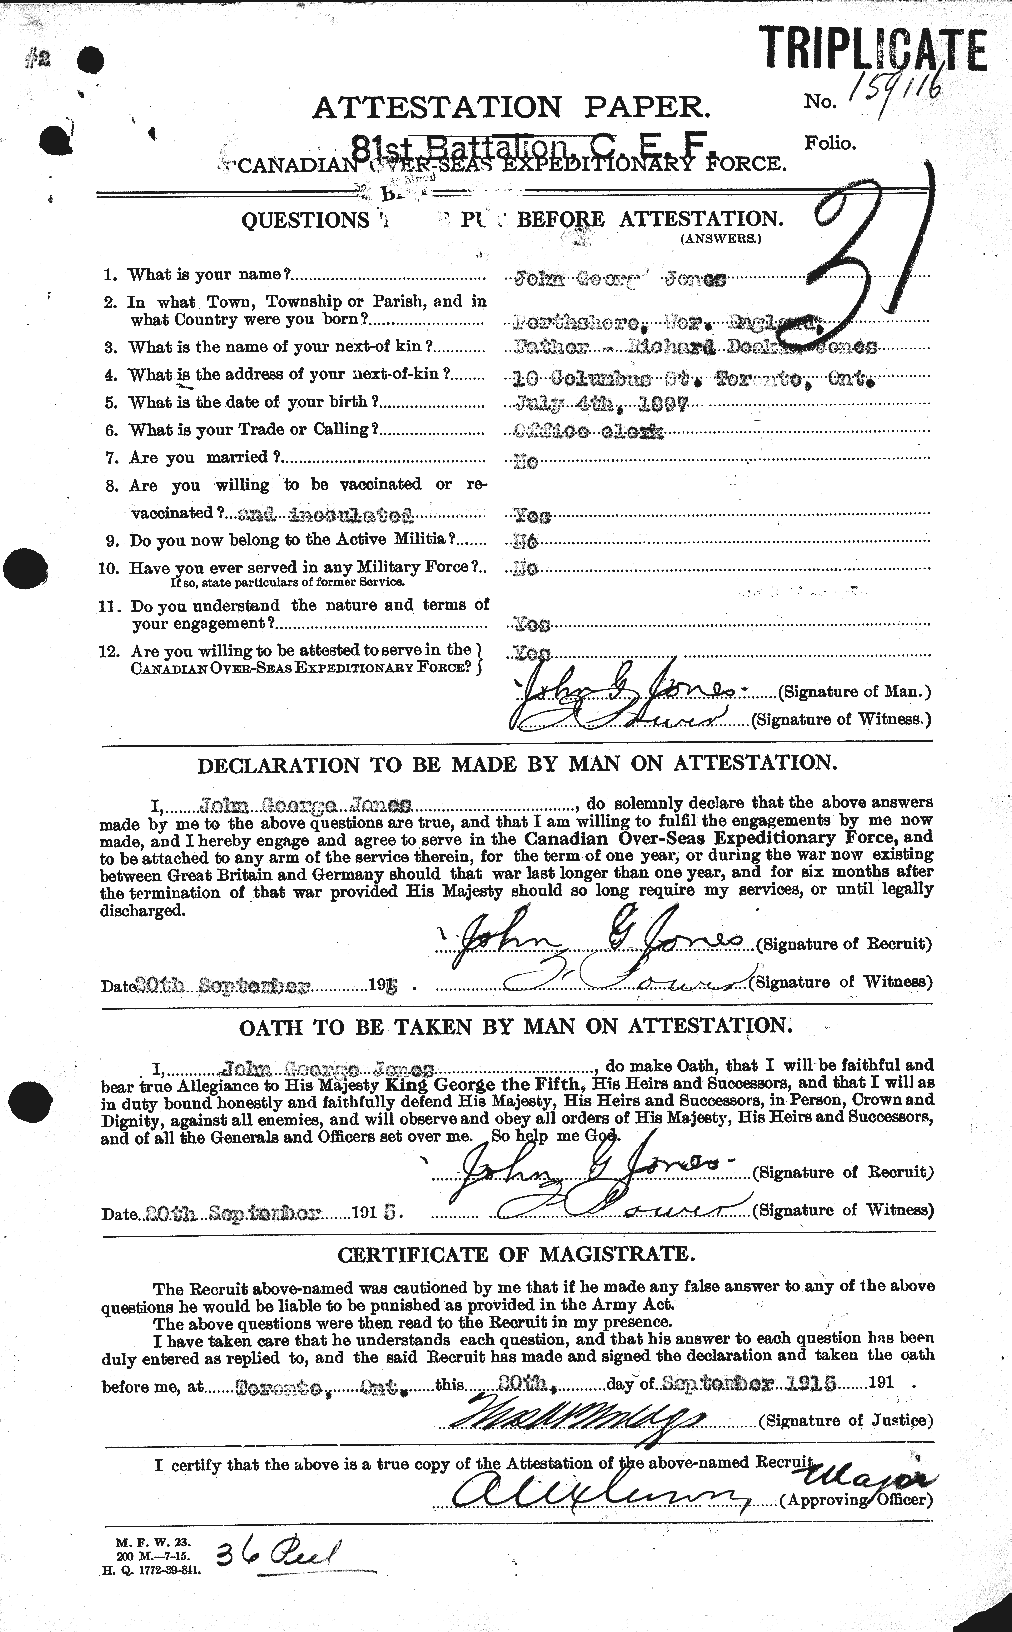 Personnel Records of the First World War - CEF 422185a